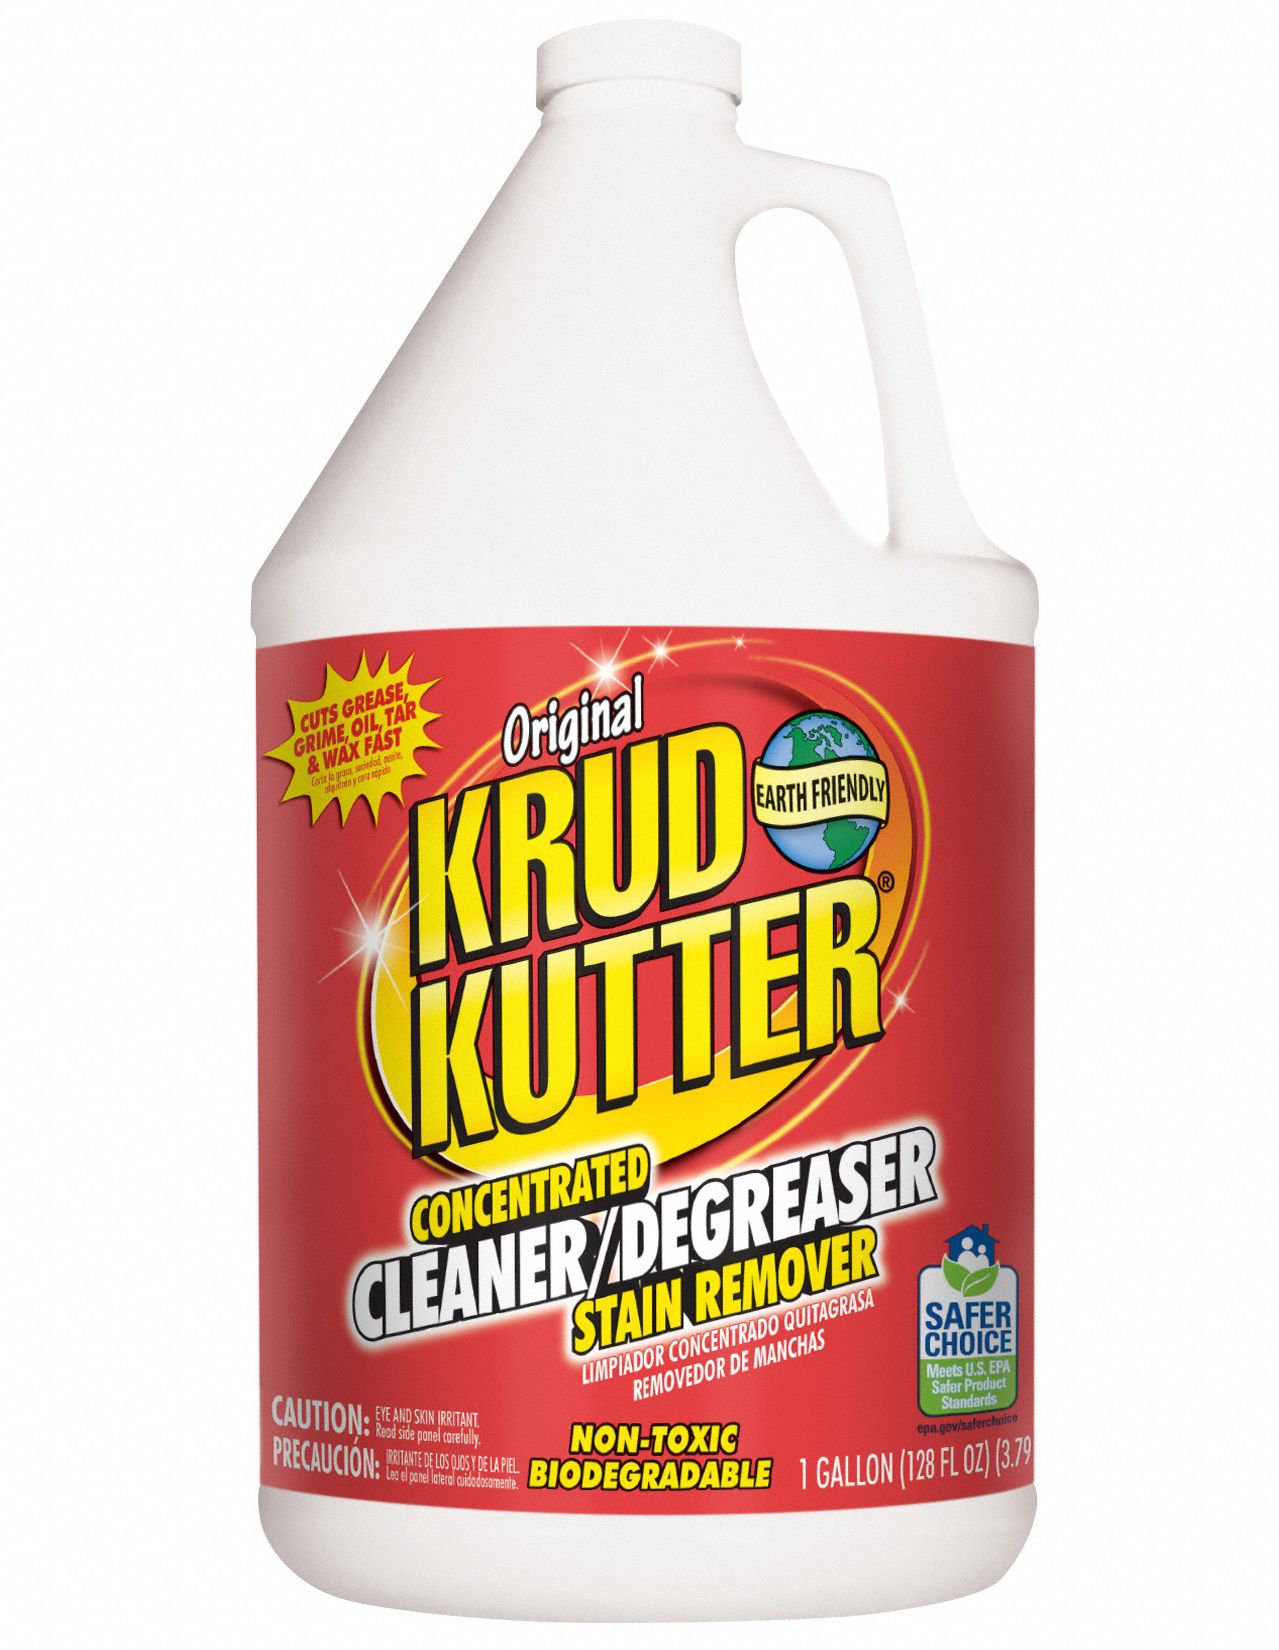 Cleaner/Degreaser: Water Based, Jug, 1 gal Container Size, Concentrated, A1